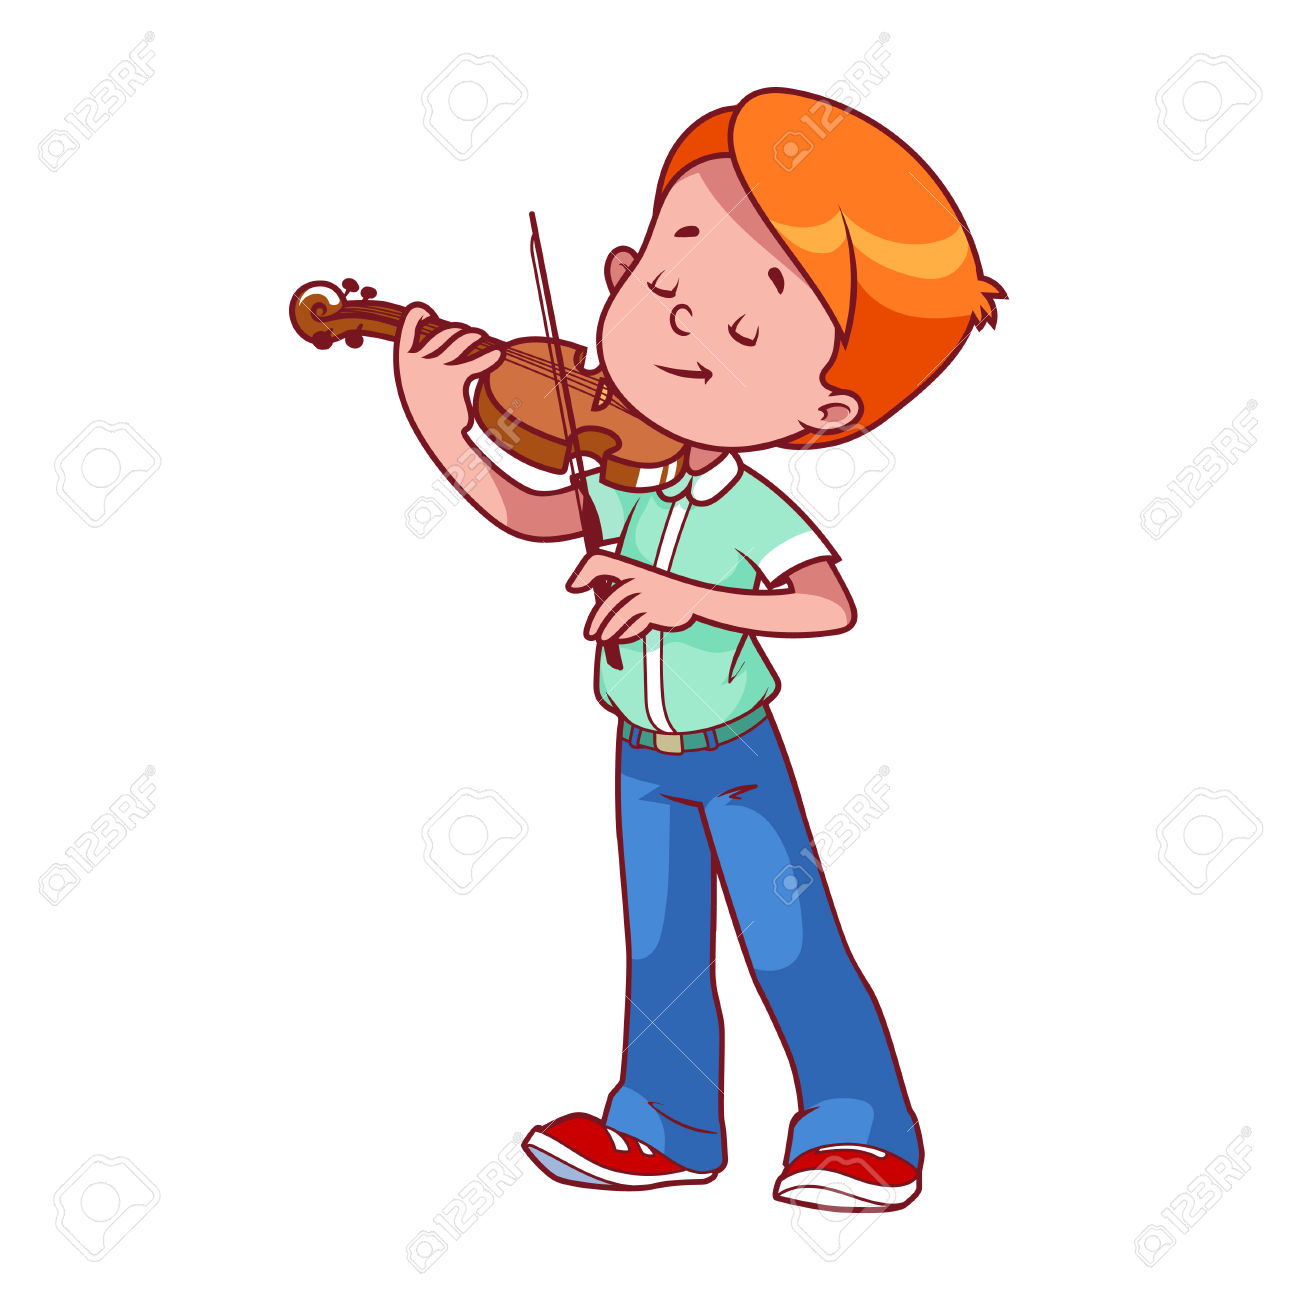 Kids playing violin clipart free.